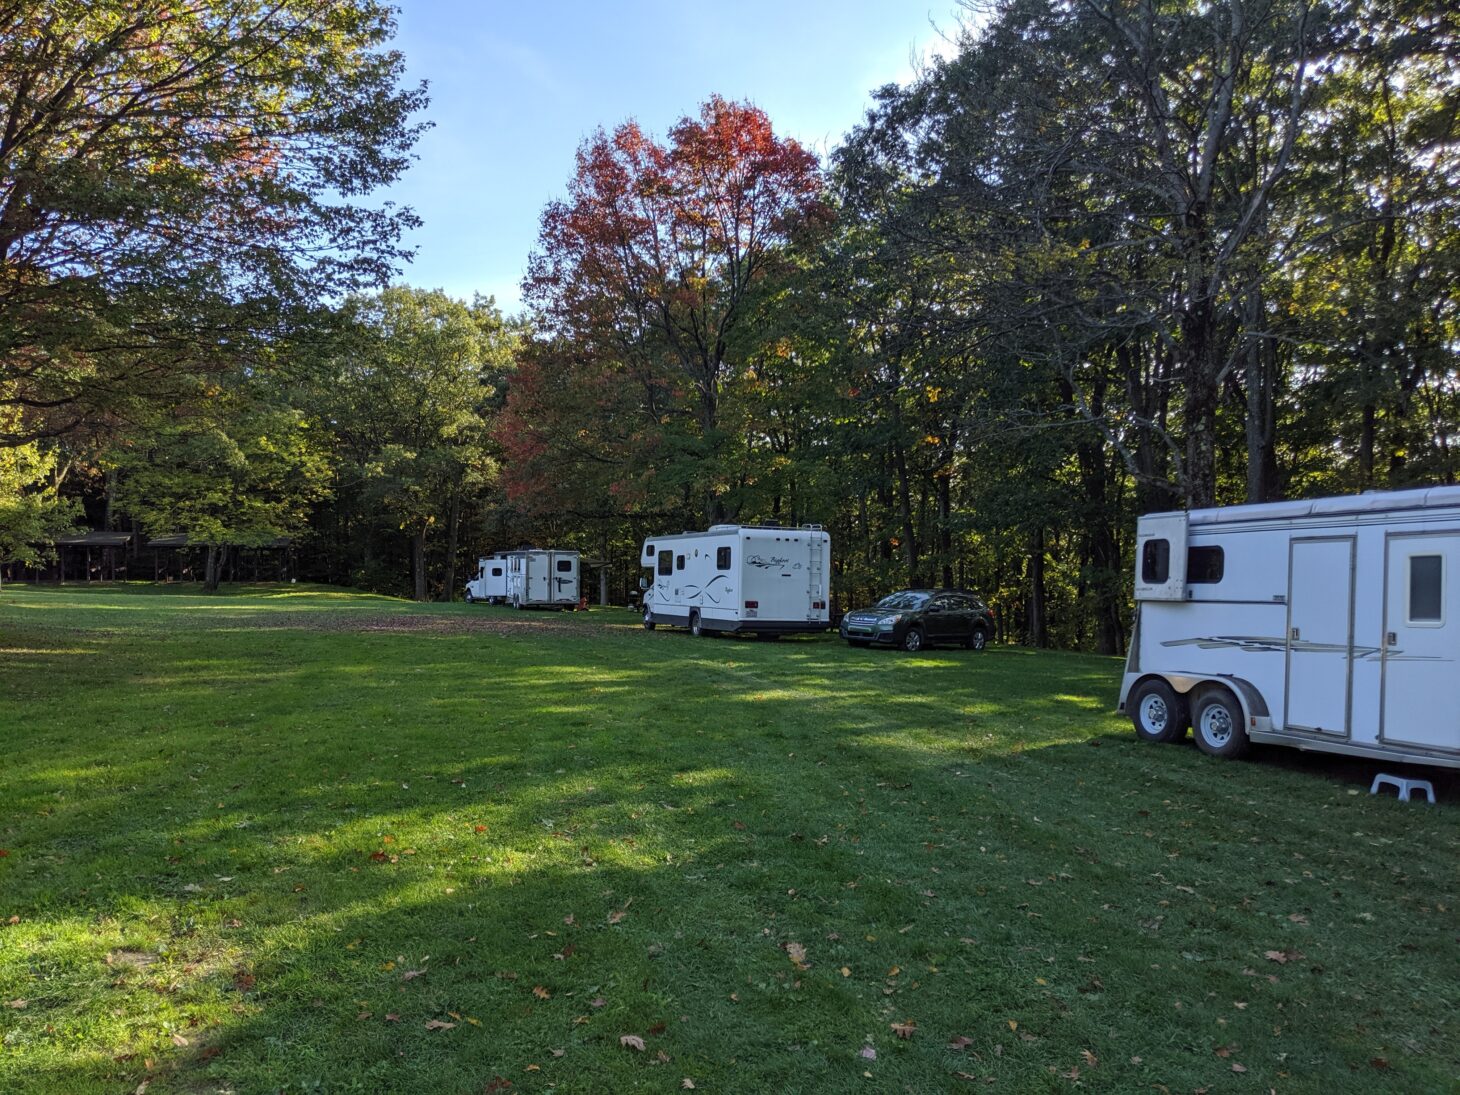 A row of RVs stands at the edge of a wooded area